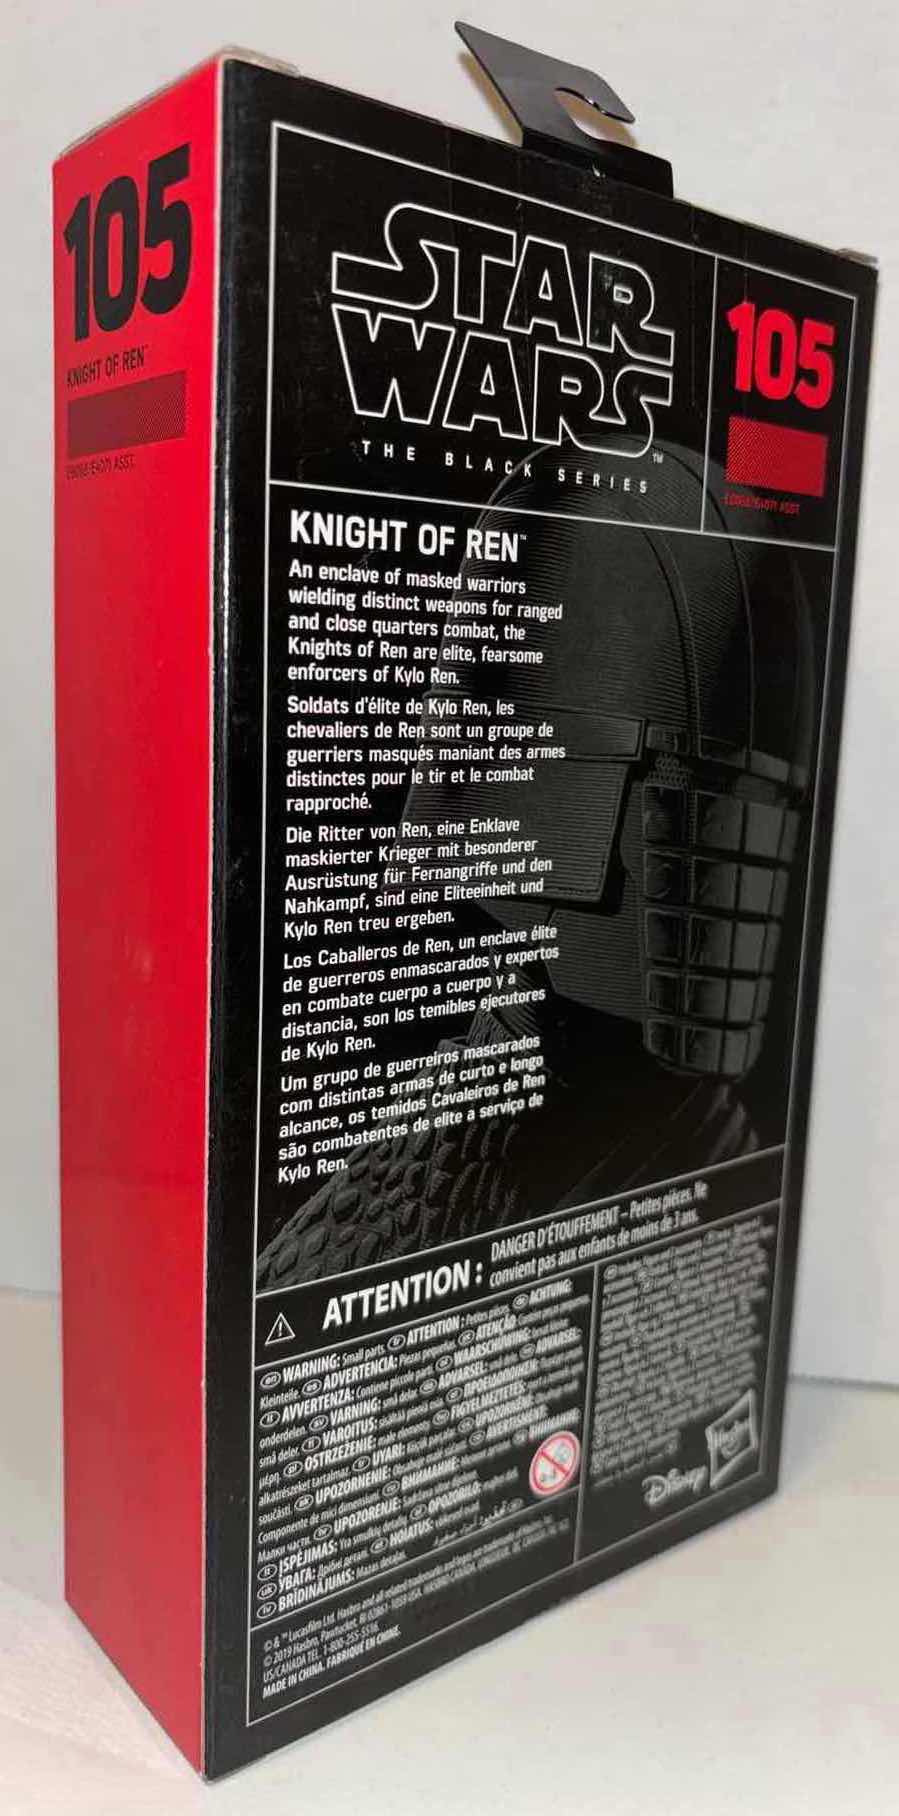 Photo 3 of NEW HASBRO STAR WARS THE BLACK SERIES ACTION FIGURE & ACCESSORIES, #105 “KNIGHT OF REN”